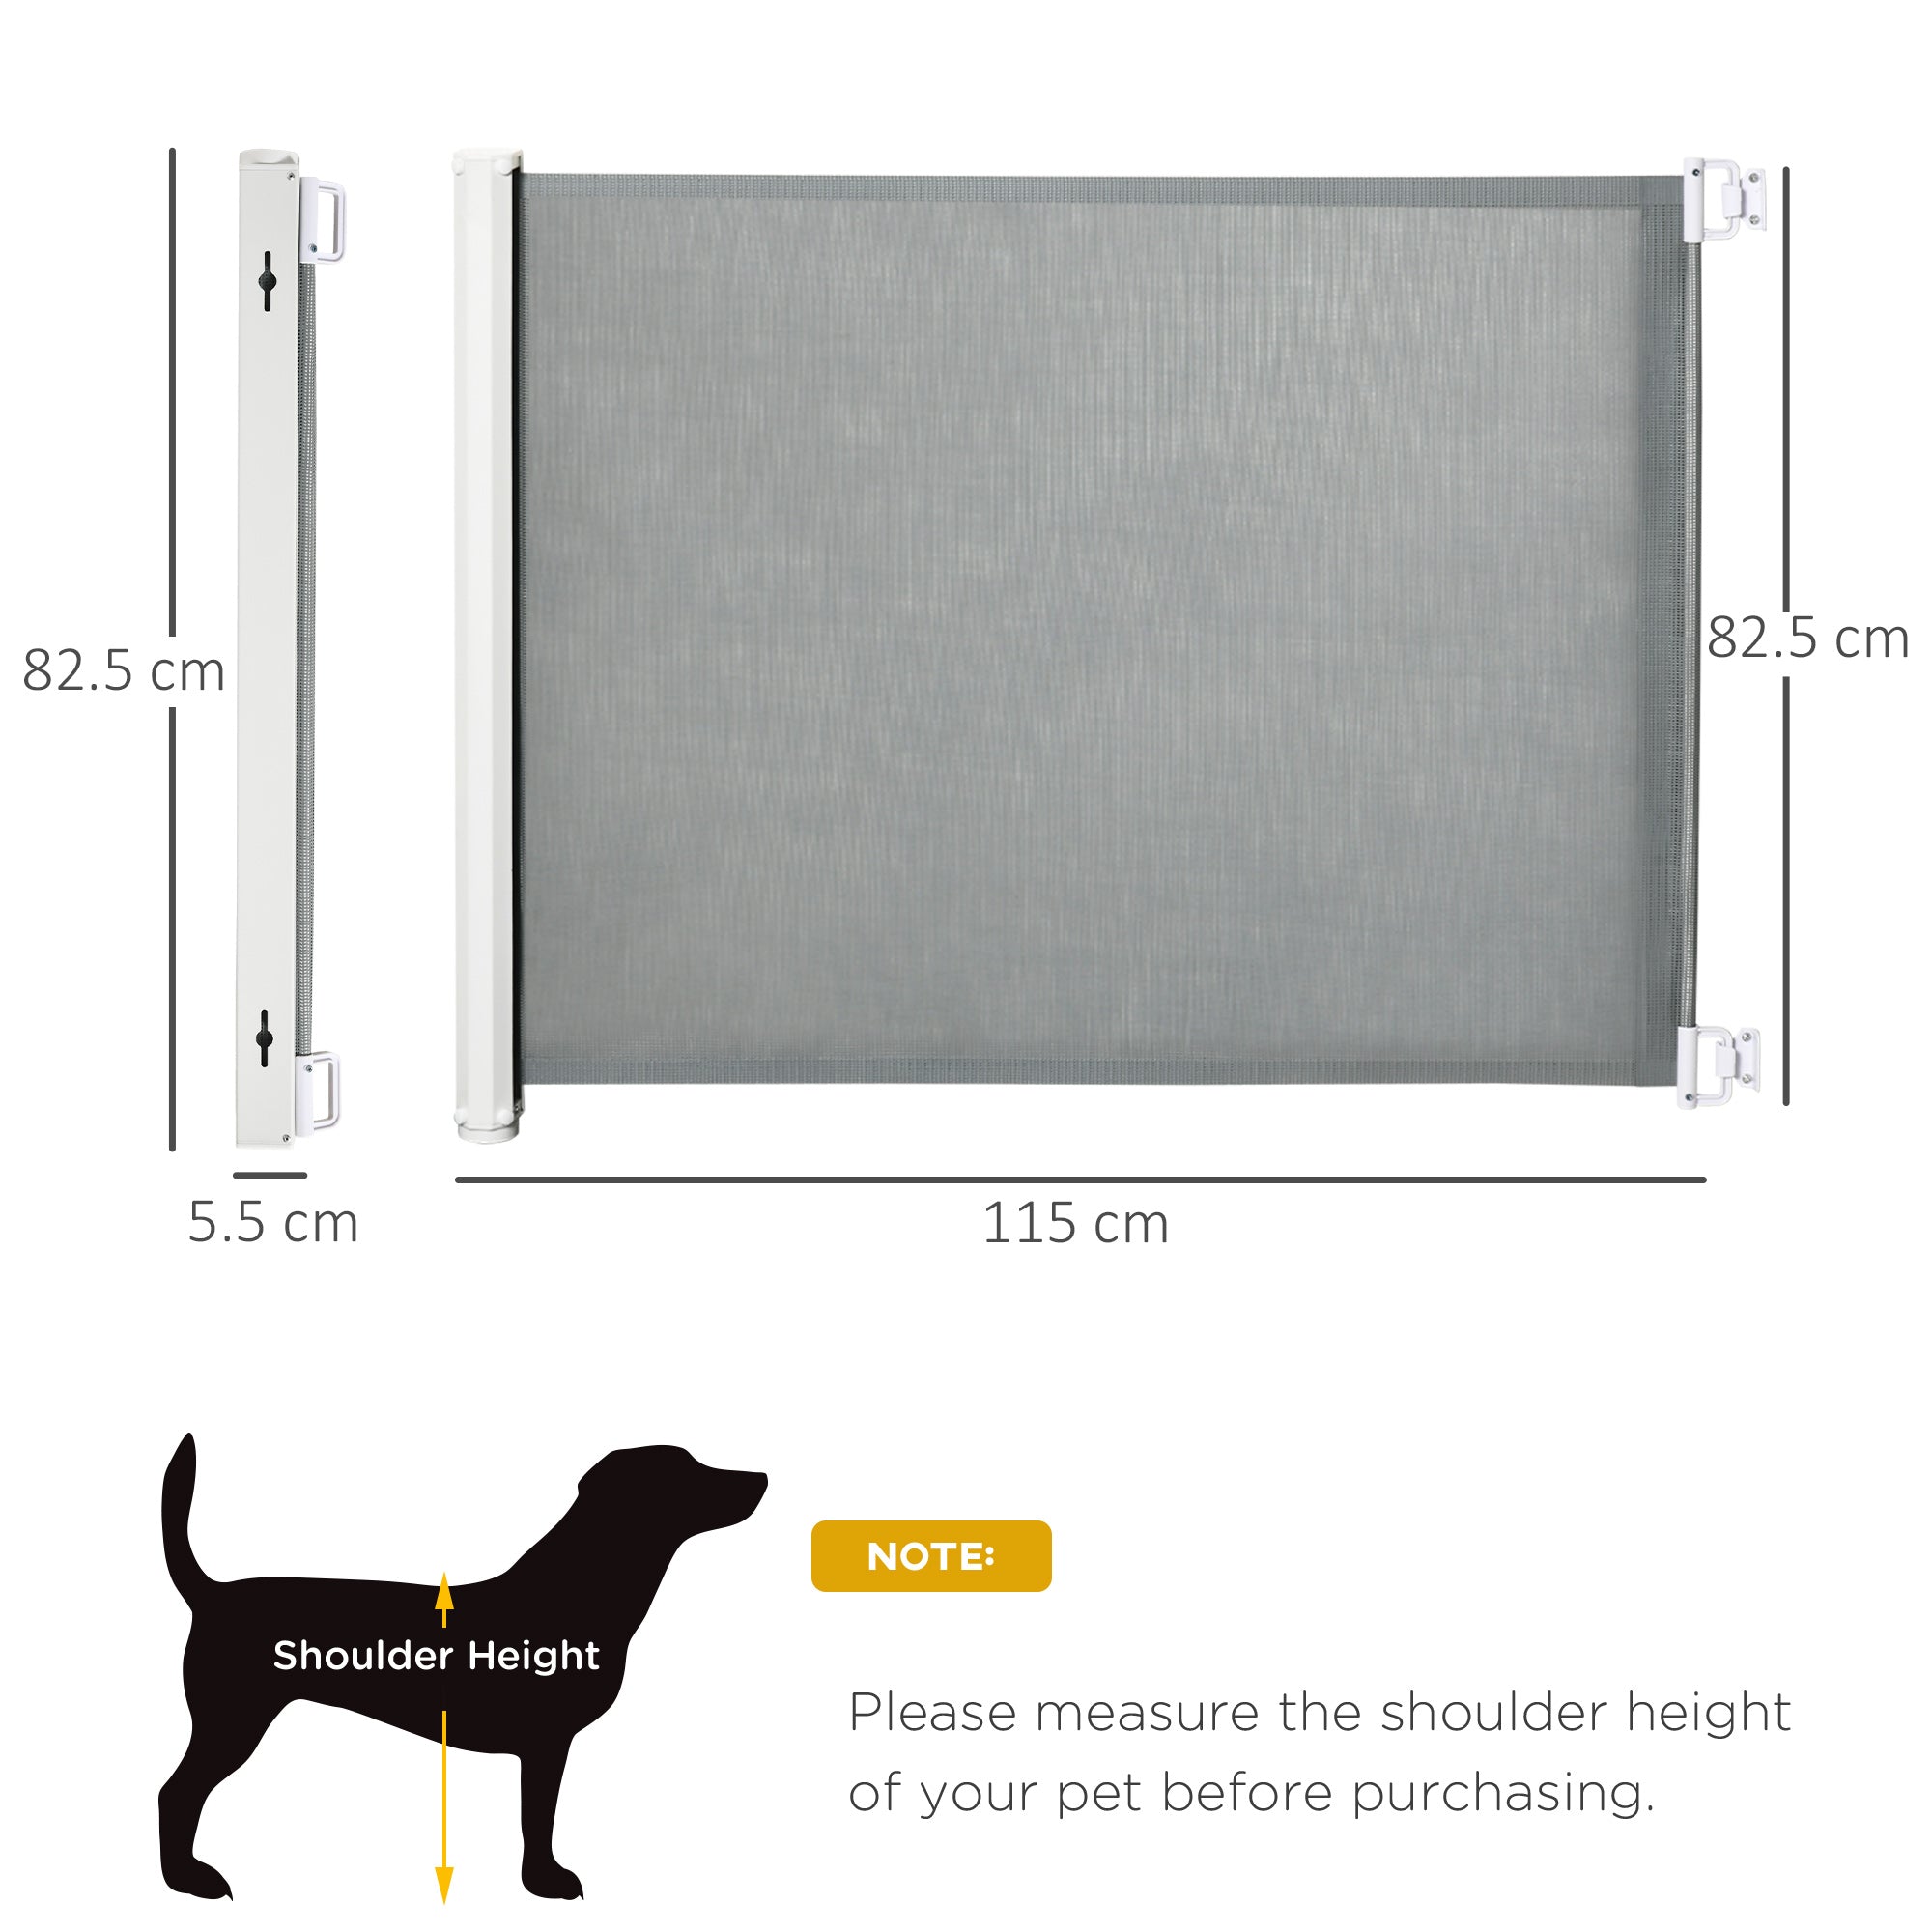 Retractable Safety Gate Dog Pet Guard Barrier Folding Protector Home Doorway Room Divider Stair Guard Grey 115L x 82.5H cm-2